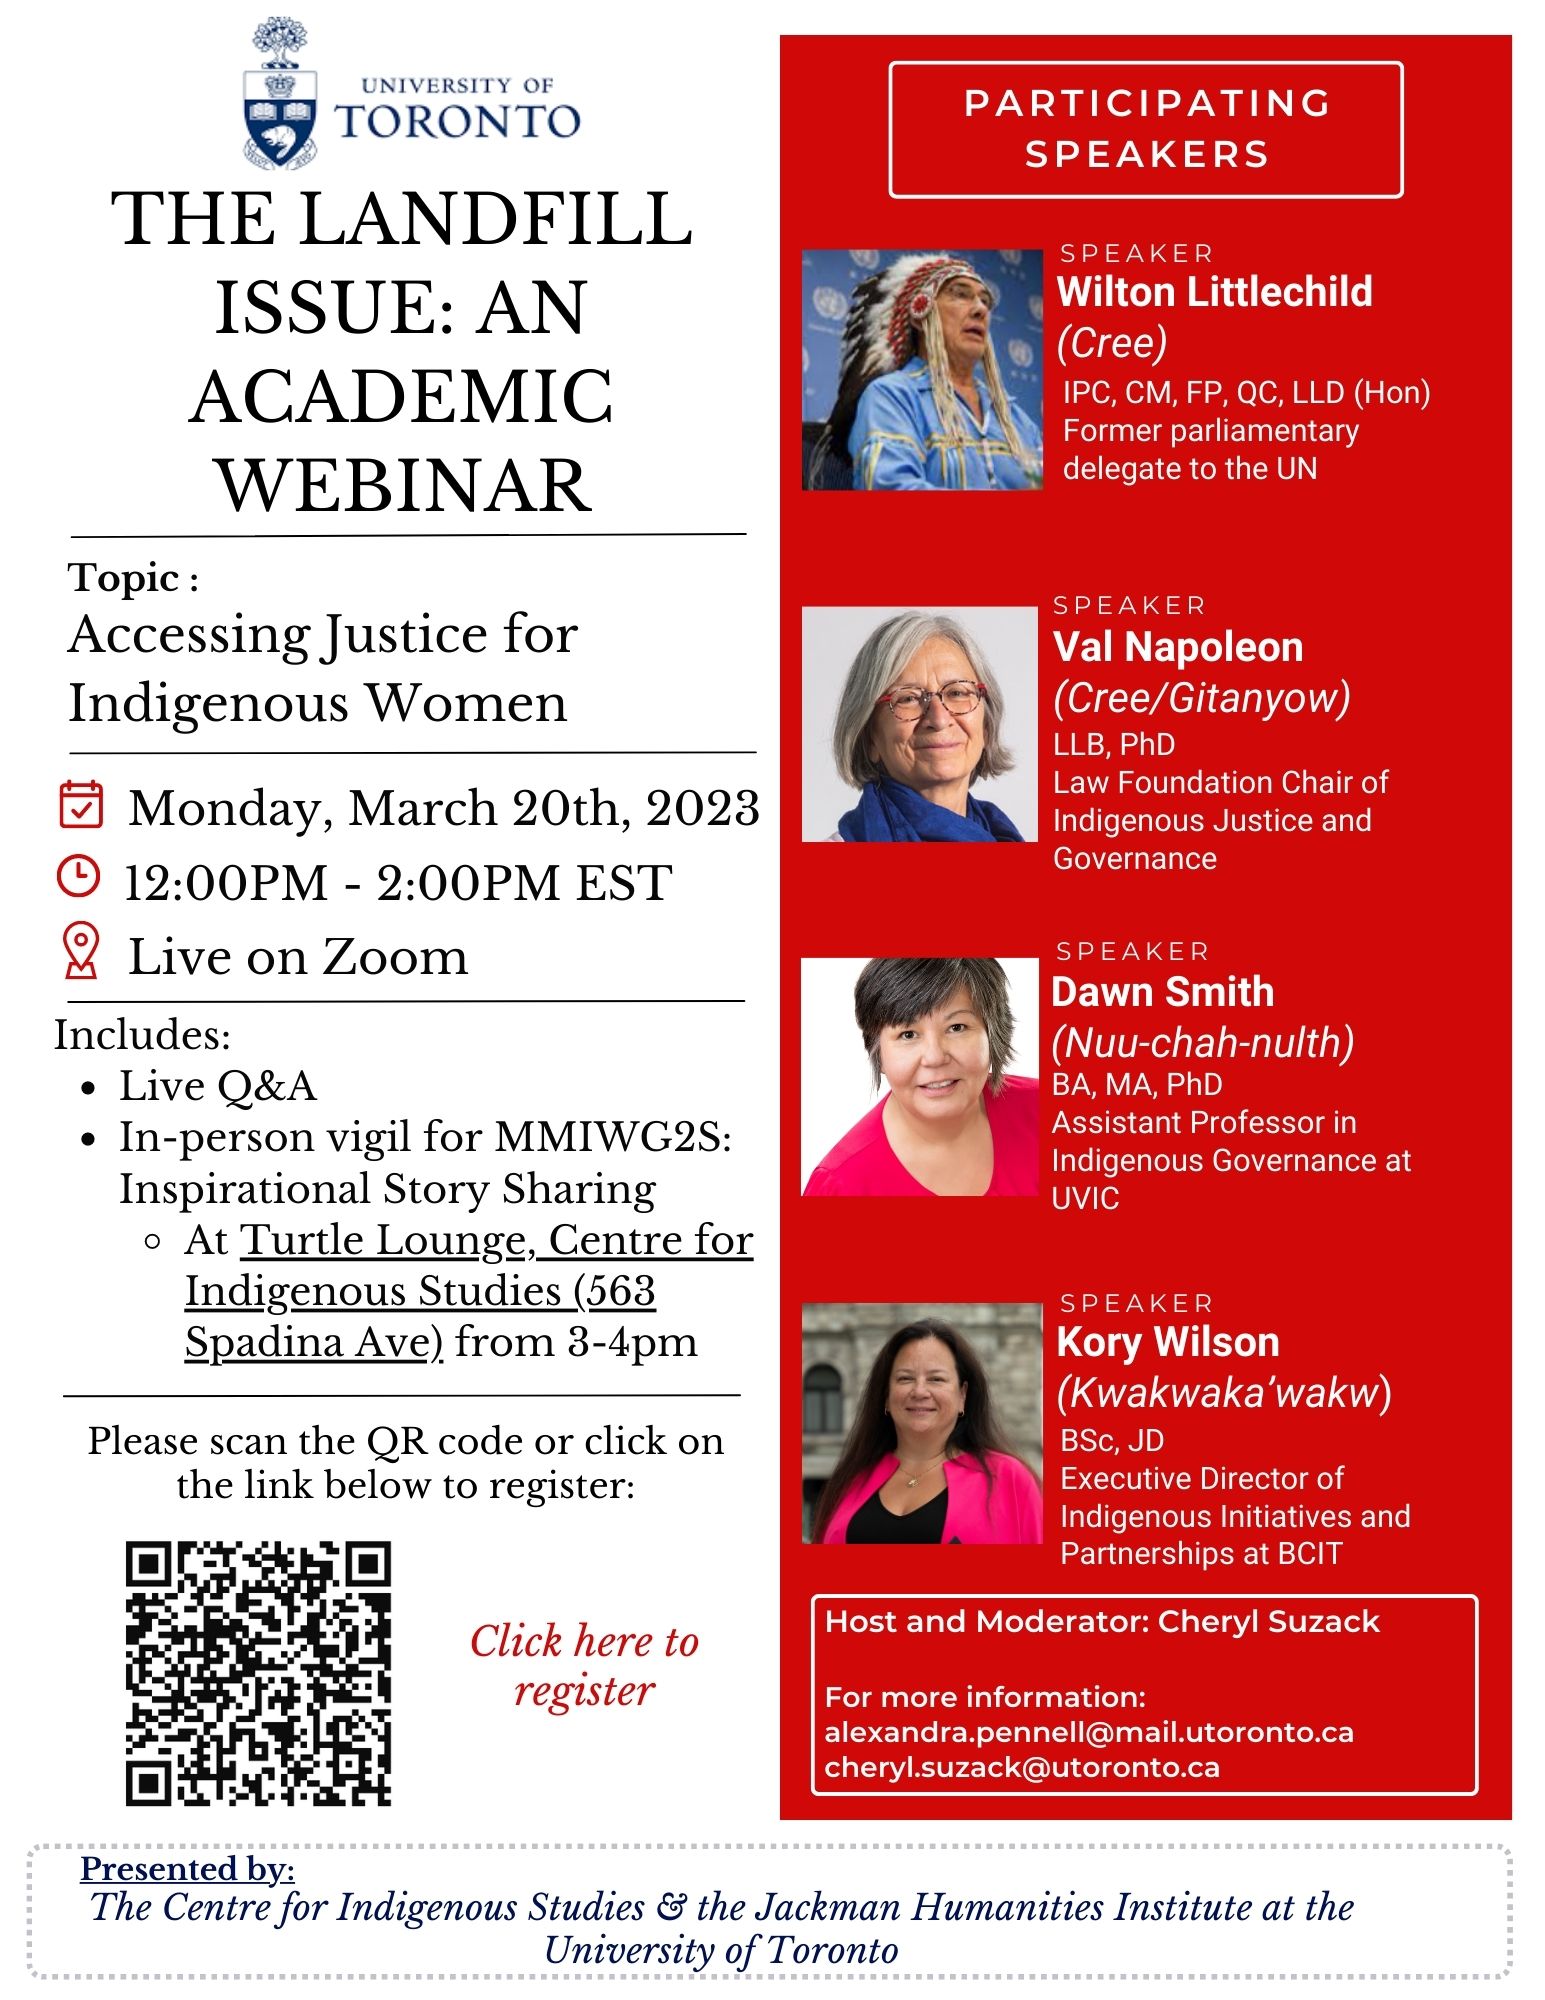 The Landfill Issue: Accessing Justice for Indigenous Women poster